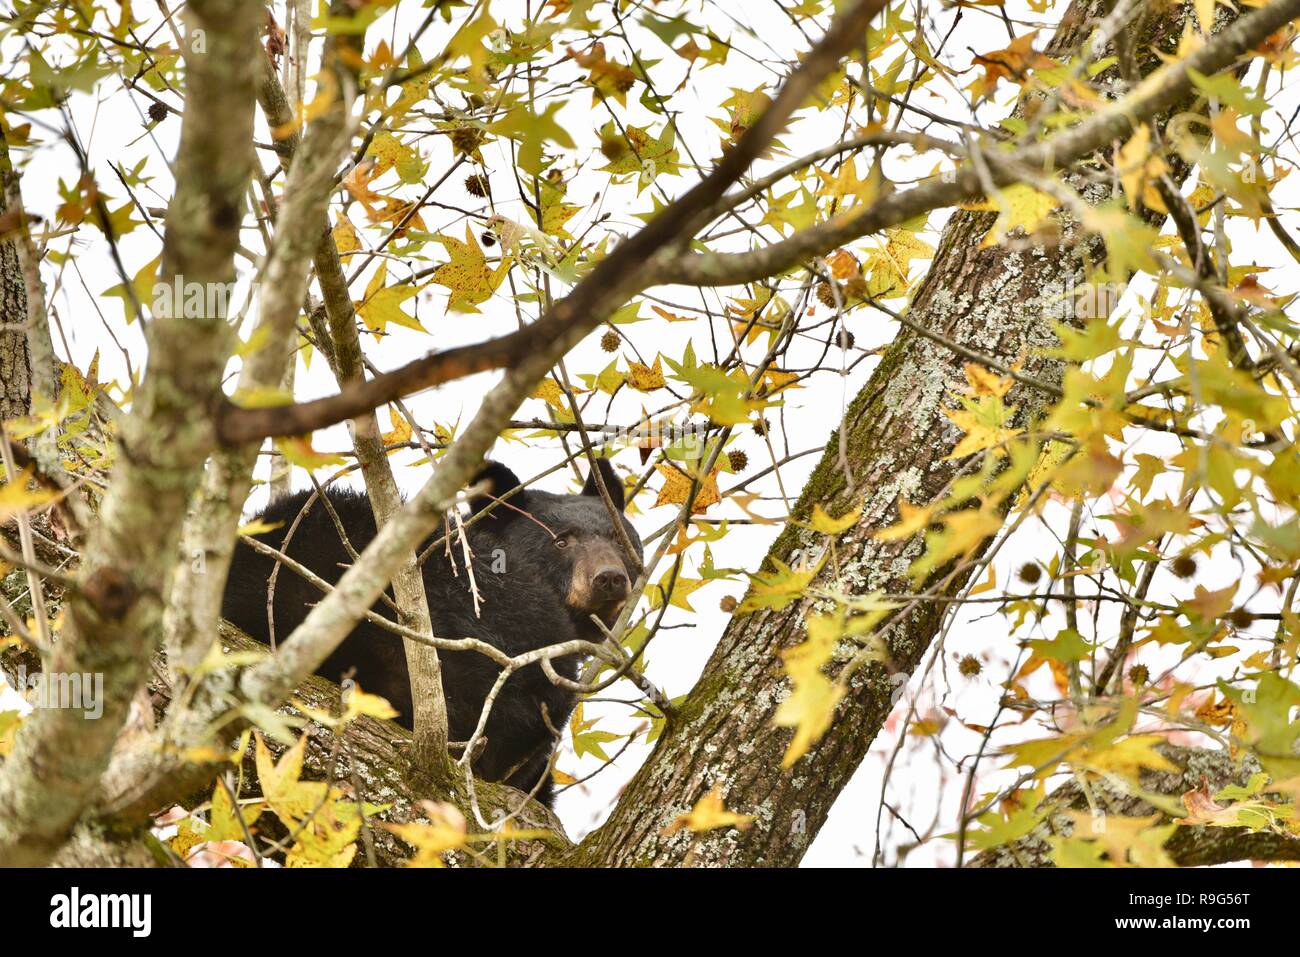 Wild American black bear up in a tree peering through branches, colorful autumn leaves, Great Smoky Mountains National Park, Gatlinburg, TN, USA Stock Photo